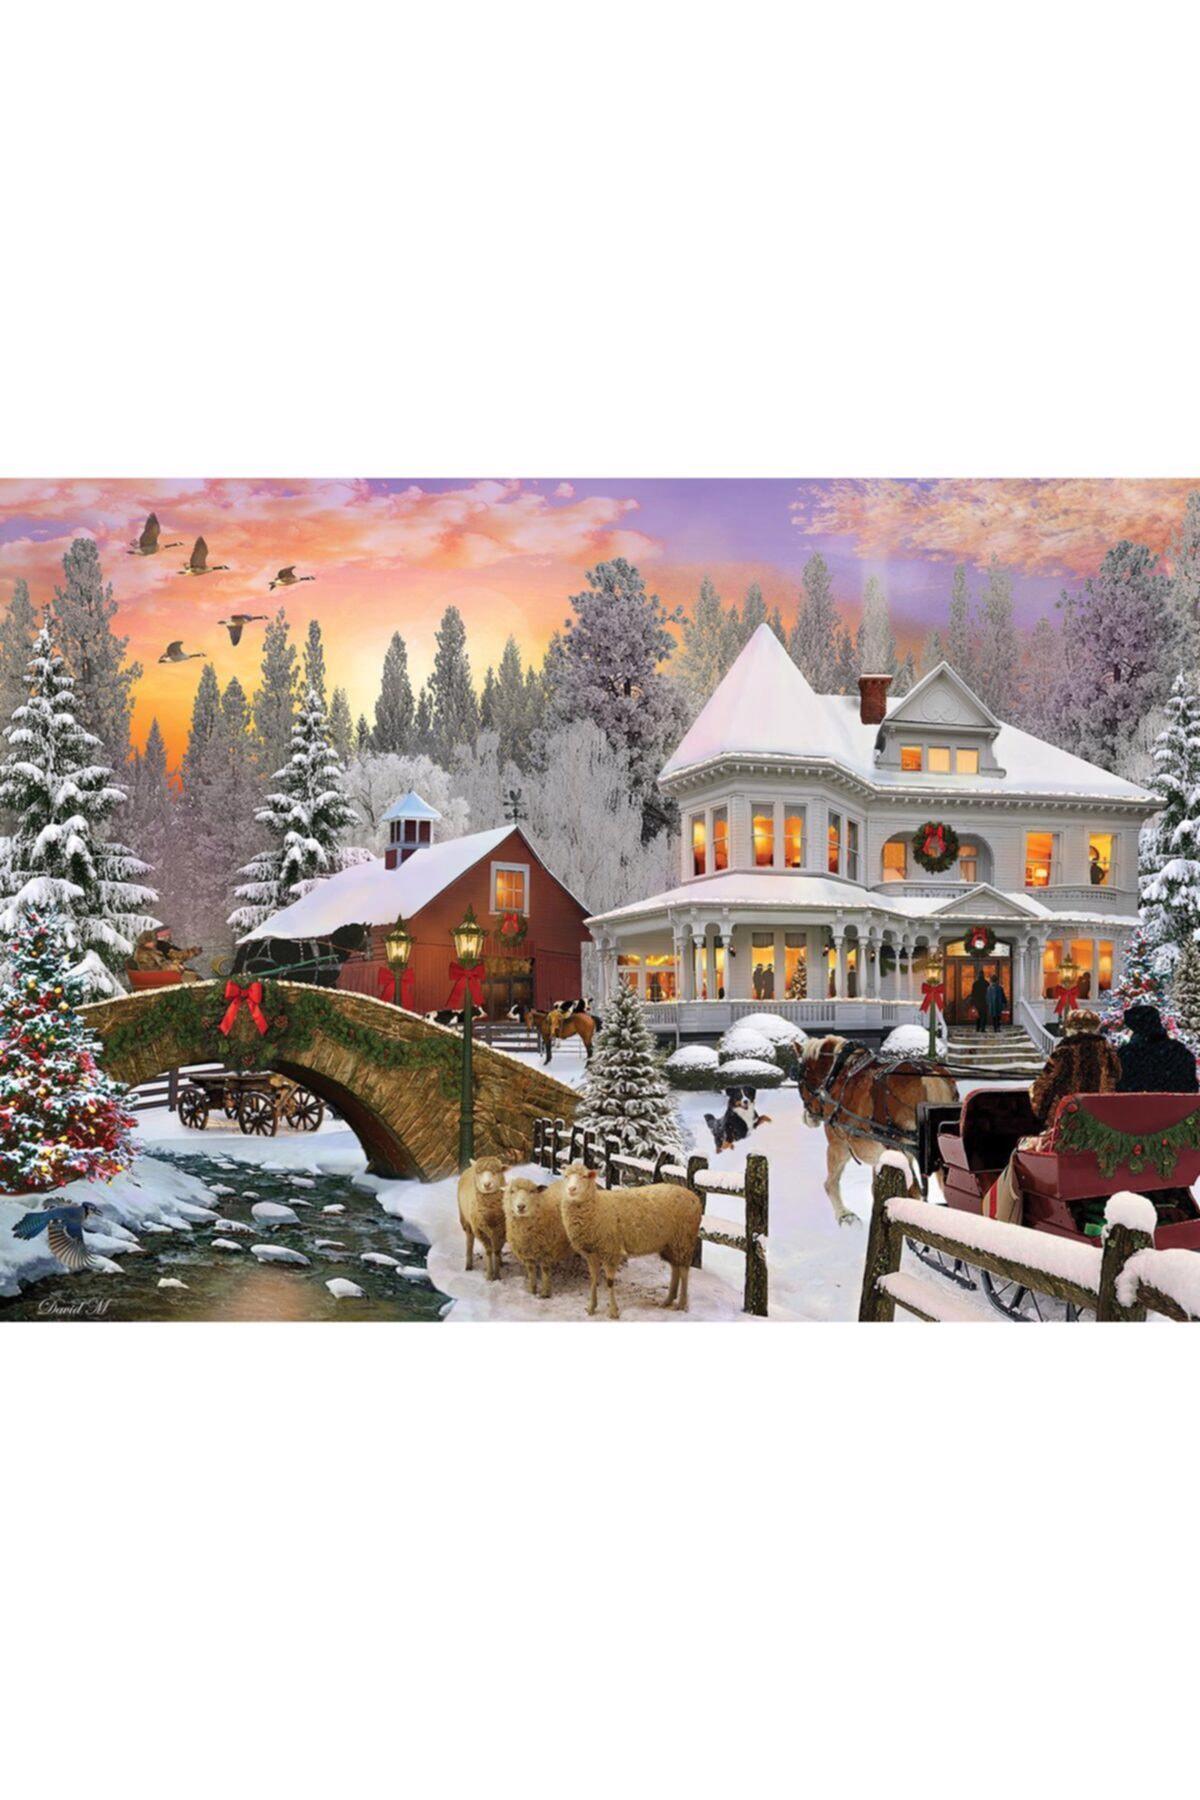 Puzzle David Maclean: Snowy Day